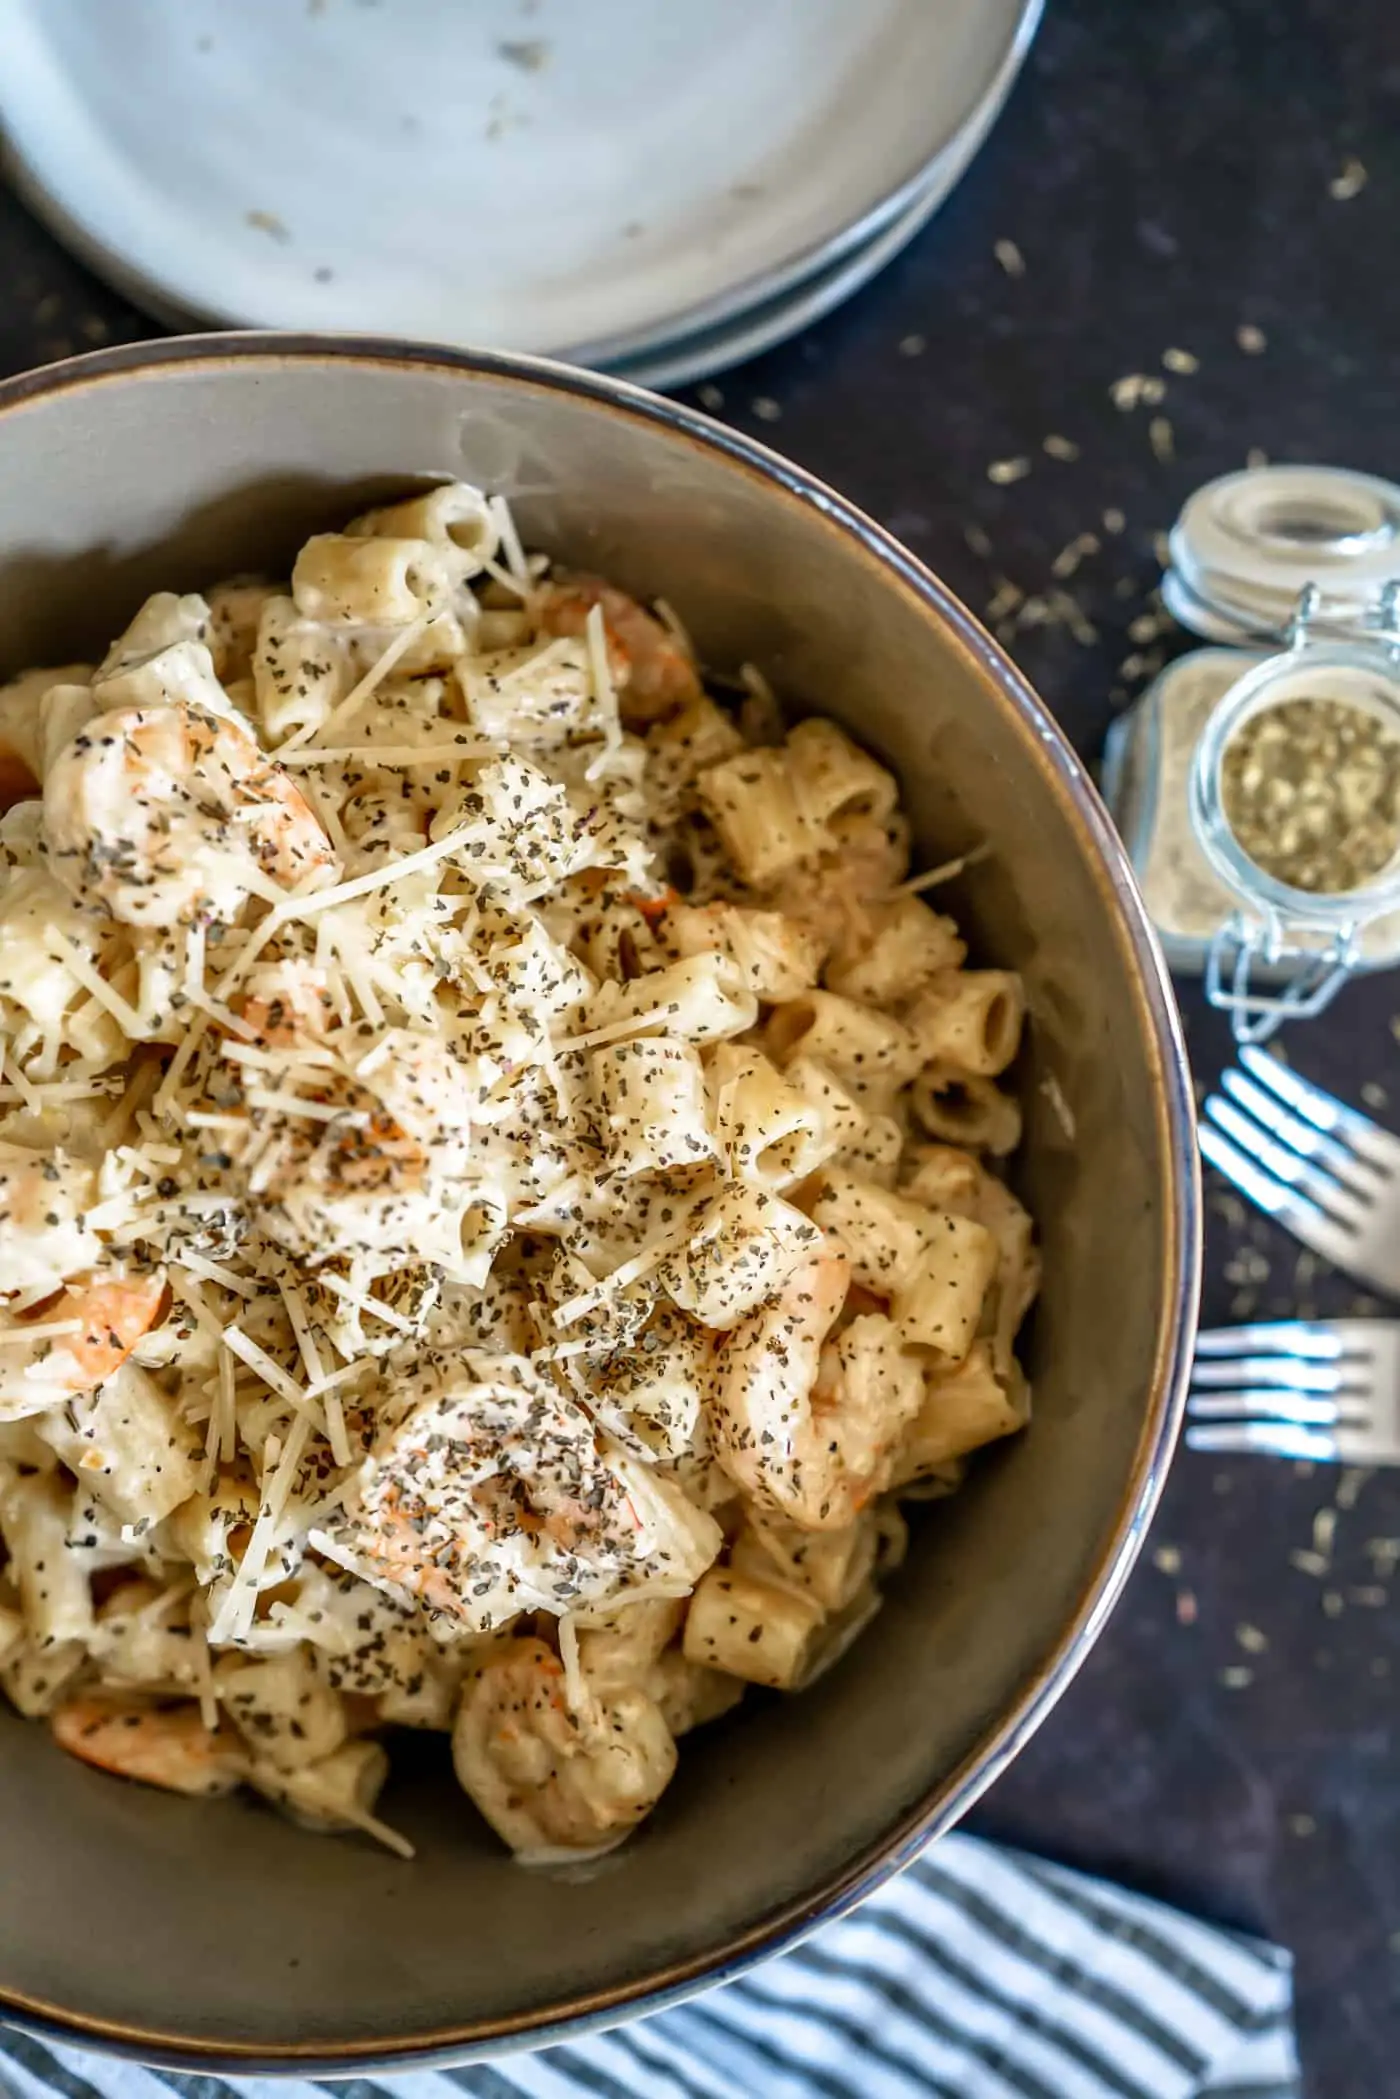 A Lily Love Affair shares a delicious creamy lemon pepper pasta with shrimp and parmesan cheese